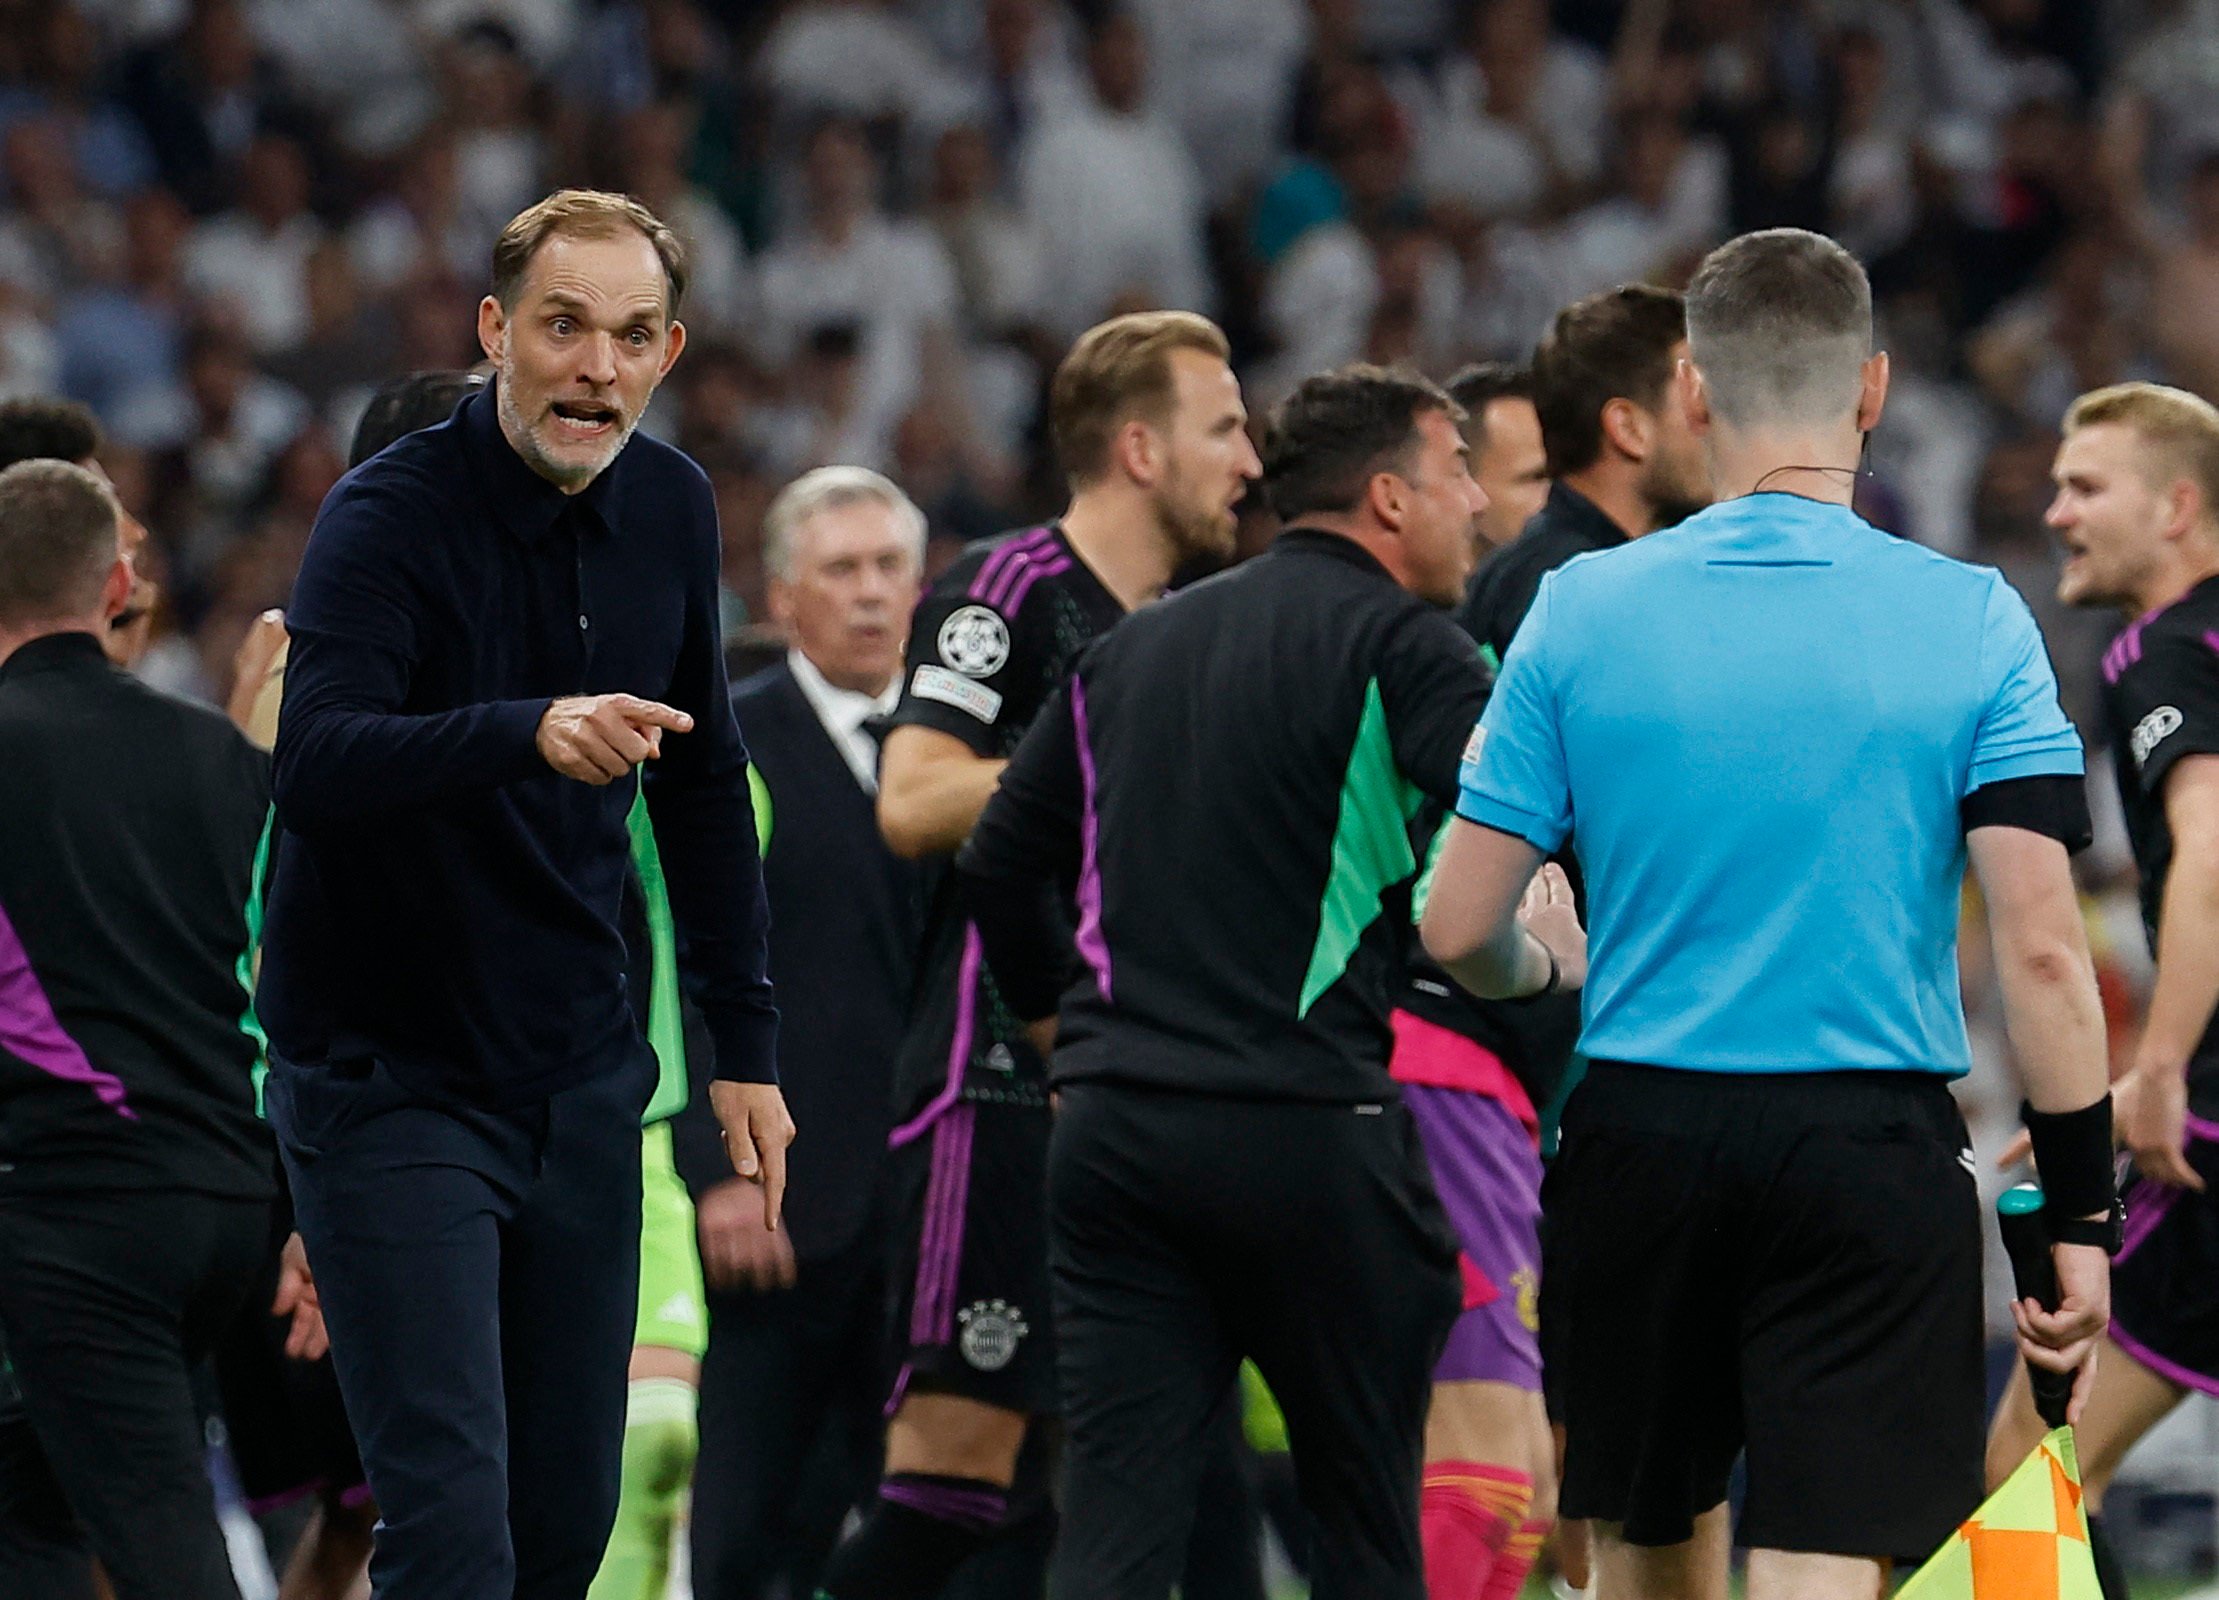 Bayern Munich manager Thomas Tuchel remonstrates with an assistant referee in Madrid on Wednesday. Photo: Reuters